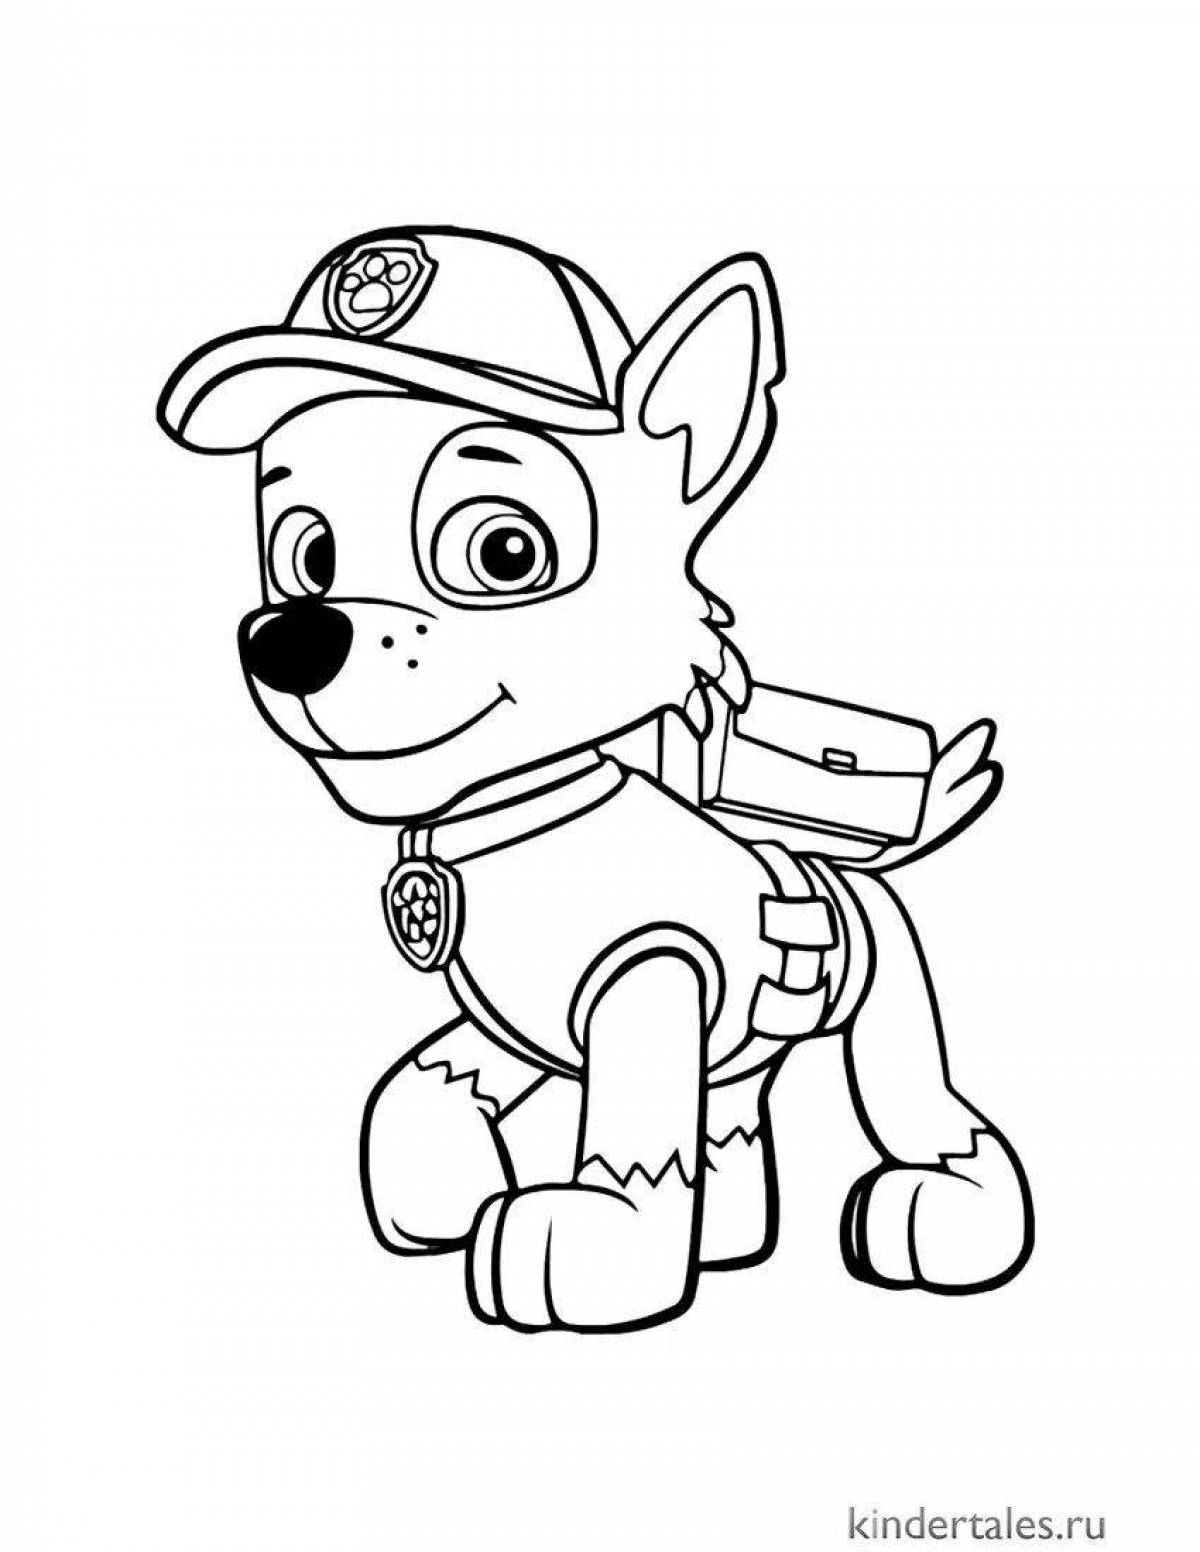 Coloring page funny paw patrol